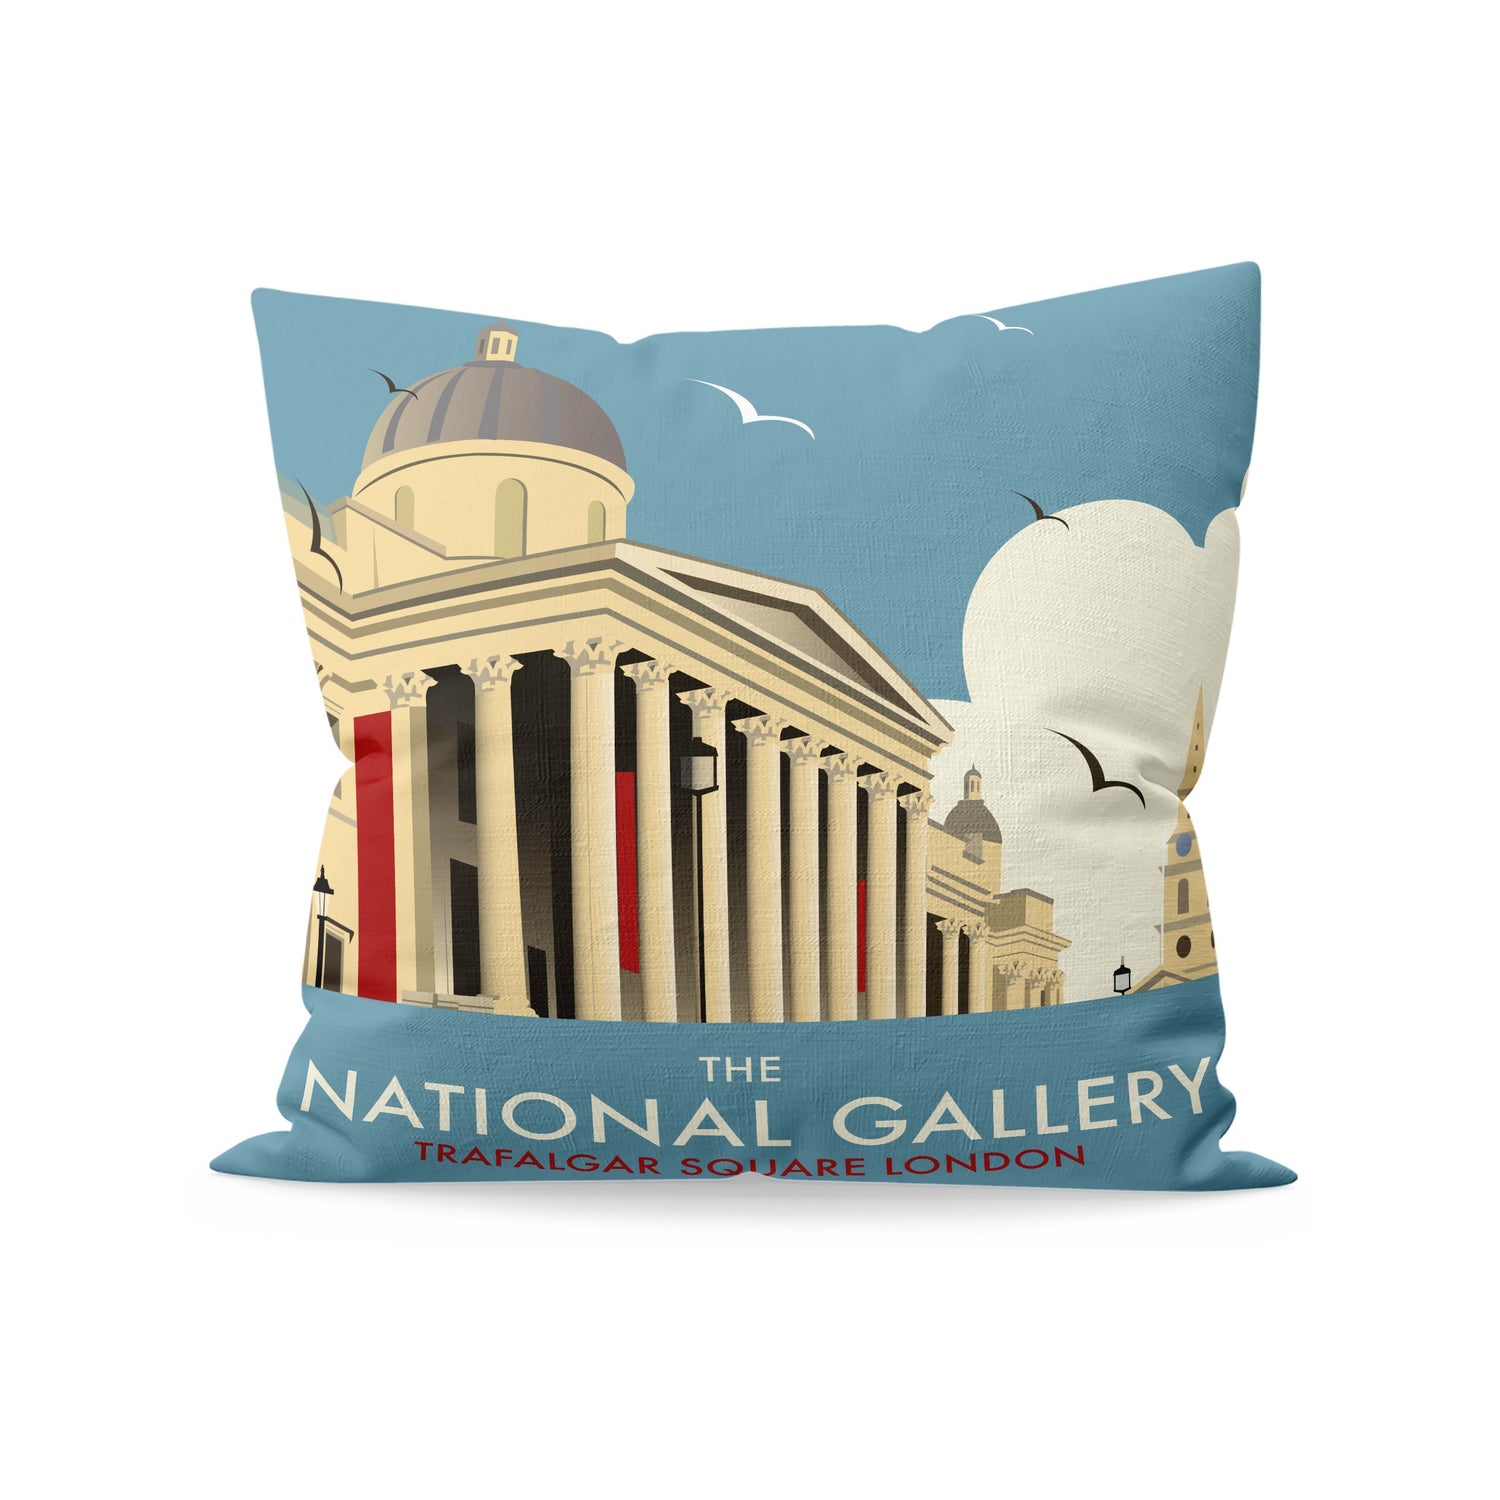 The National Gallery, London Fibre Filled Cushion